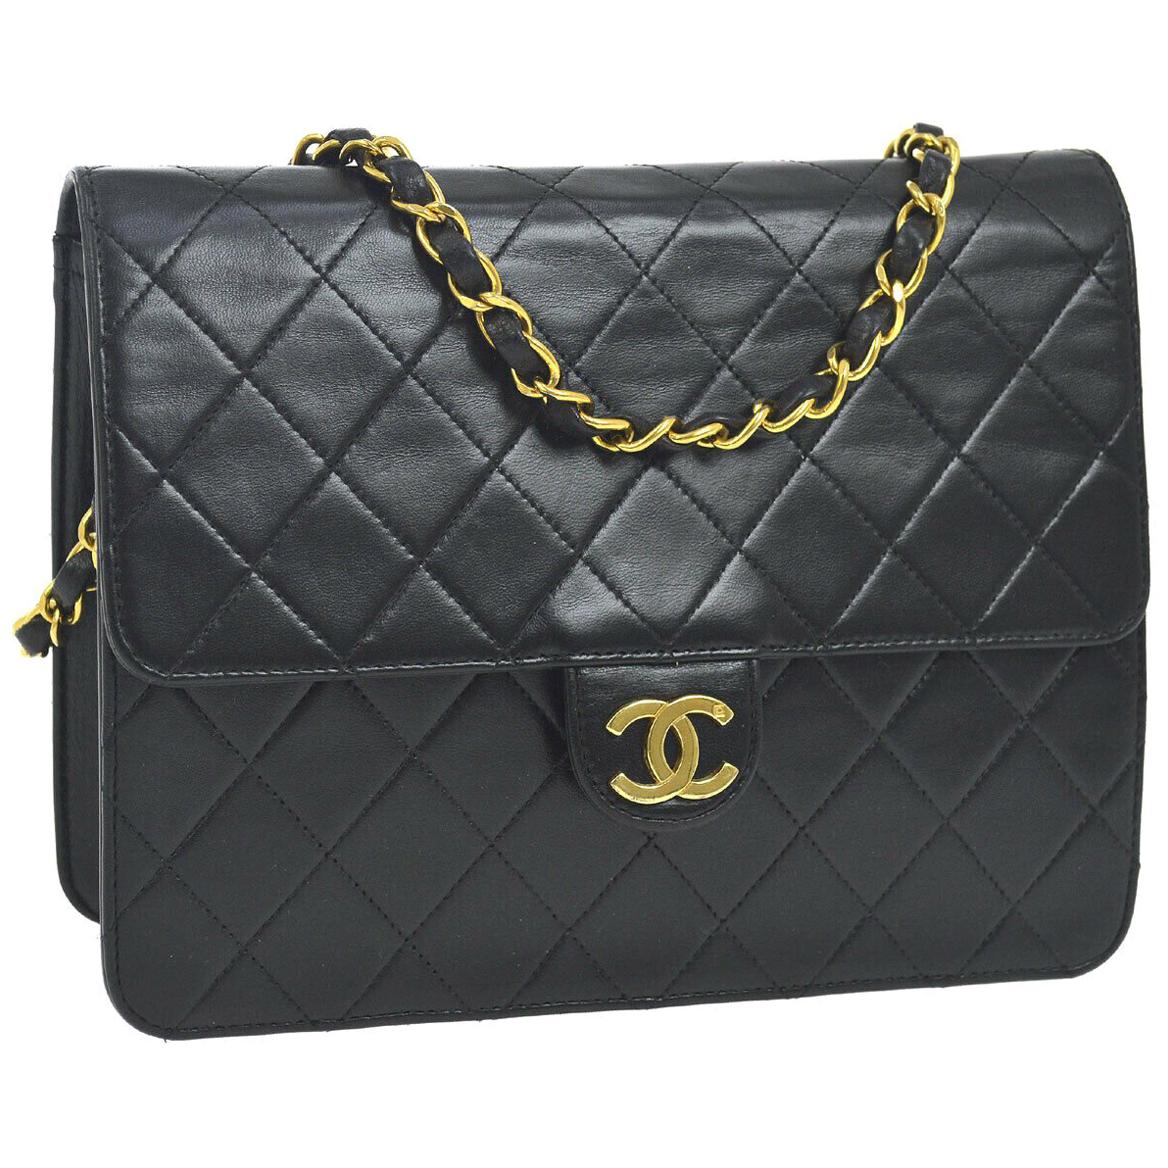 Chanel Classic Black Leather Lambskin Gold Chain Evening Shoulder Flap Bag